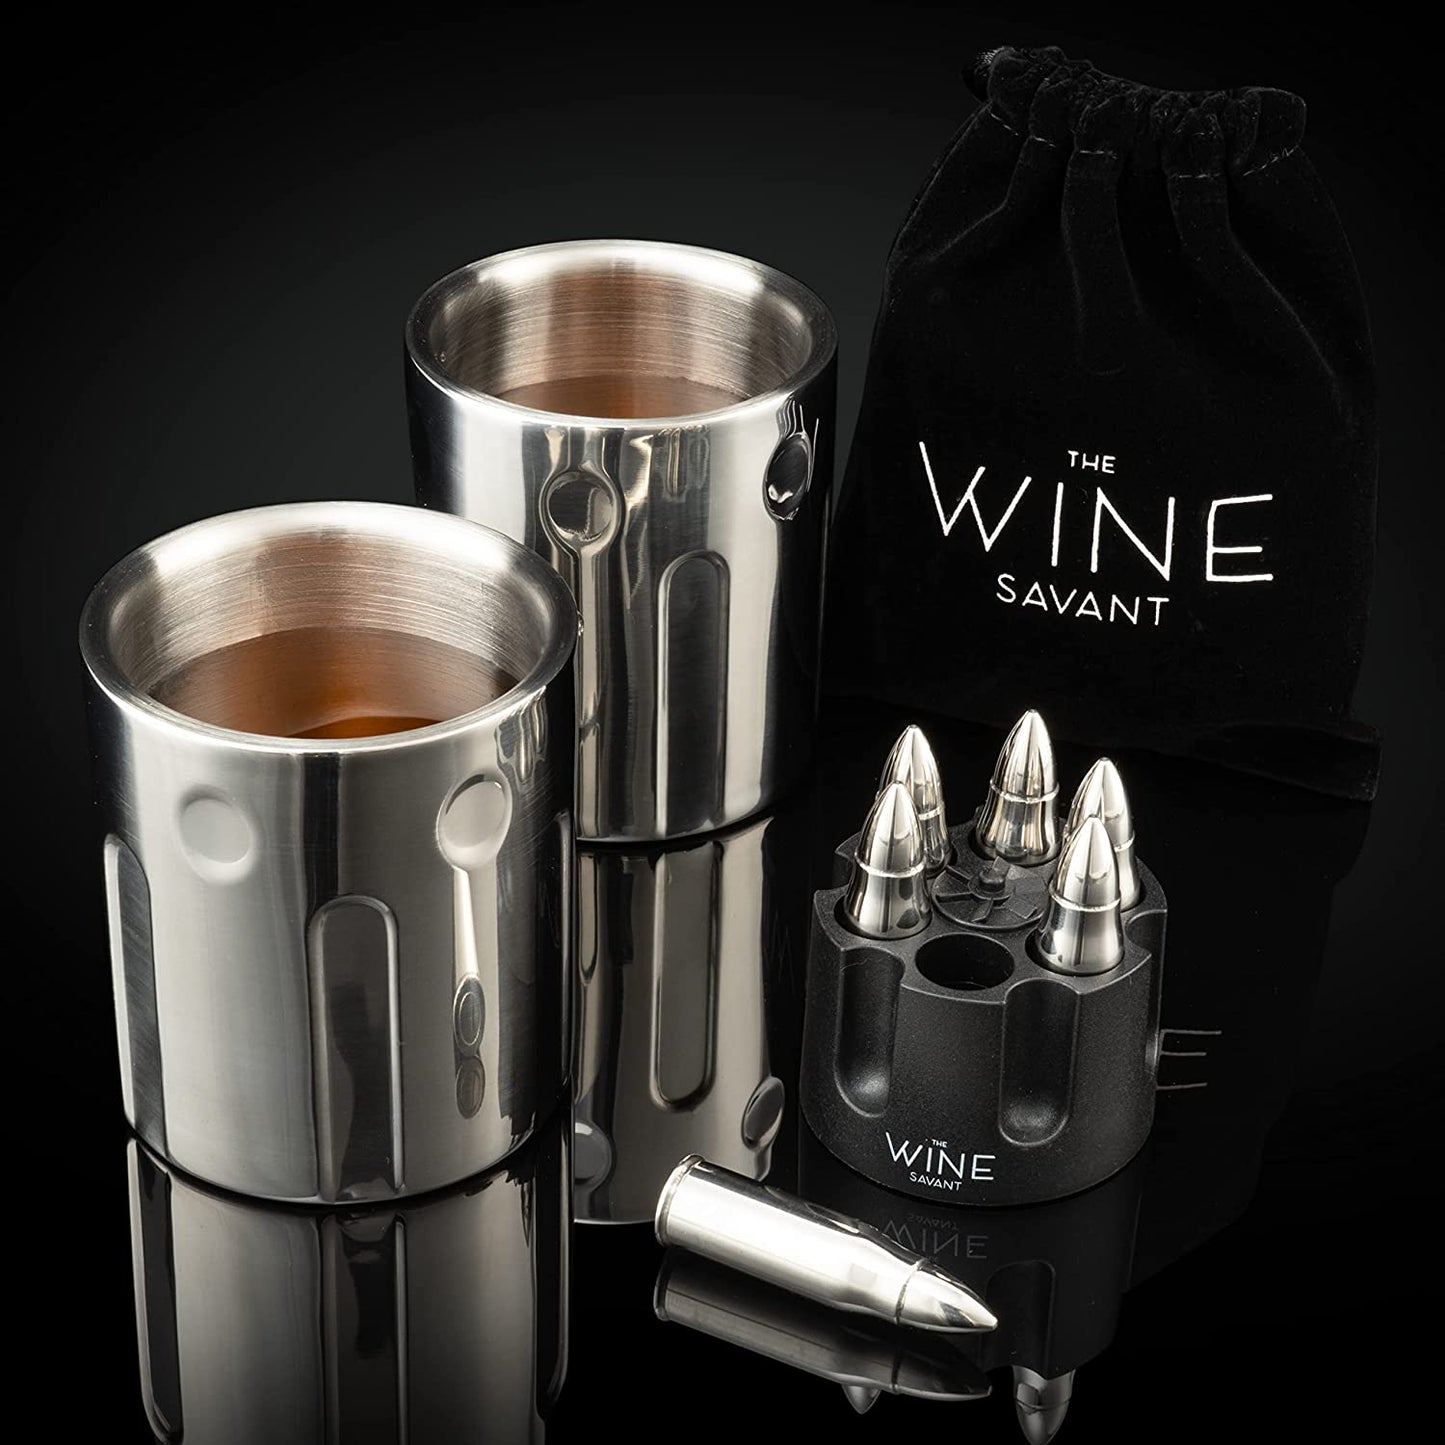 2 Metal Ice Cups & Bullet Chillers by The Wine Savant - Whiskey Stones Bullets Stainless Steel with Revolver Case, 1.75in Bullet Chillers Set of 6, Whiskey Gift Sets, Military Gifts, Veteran Gifts-1